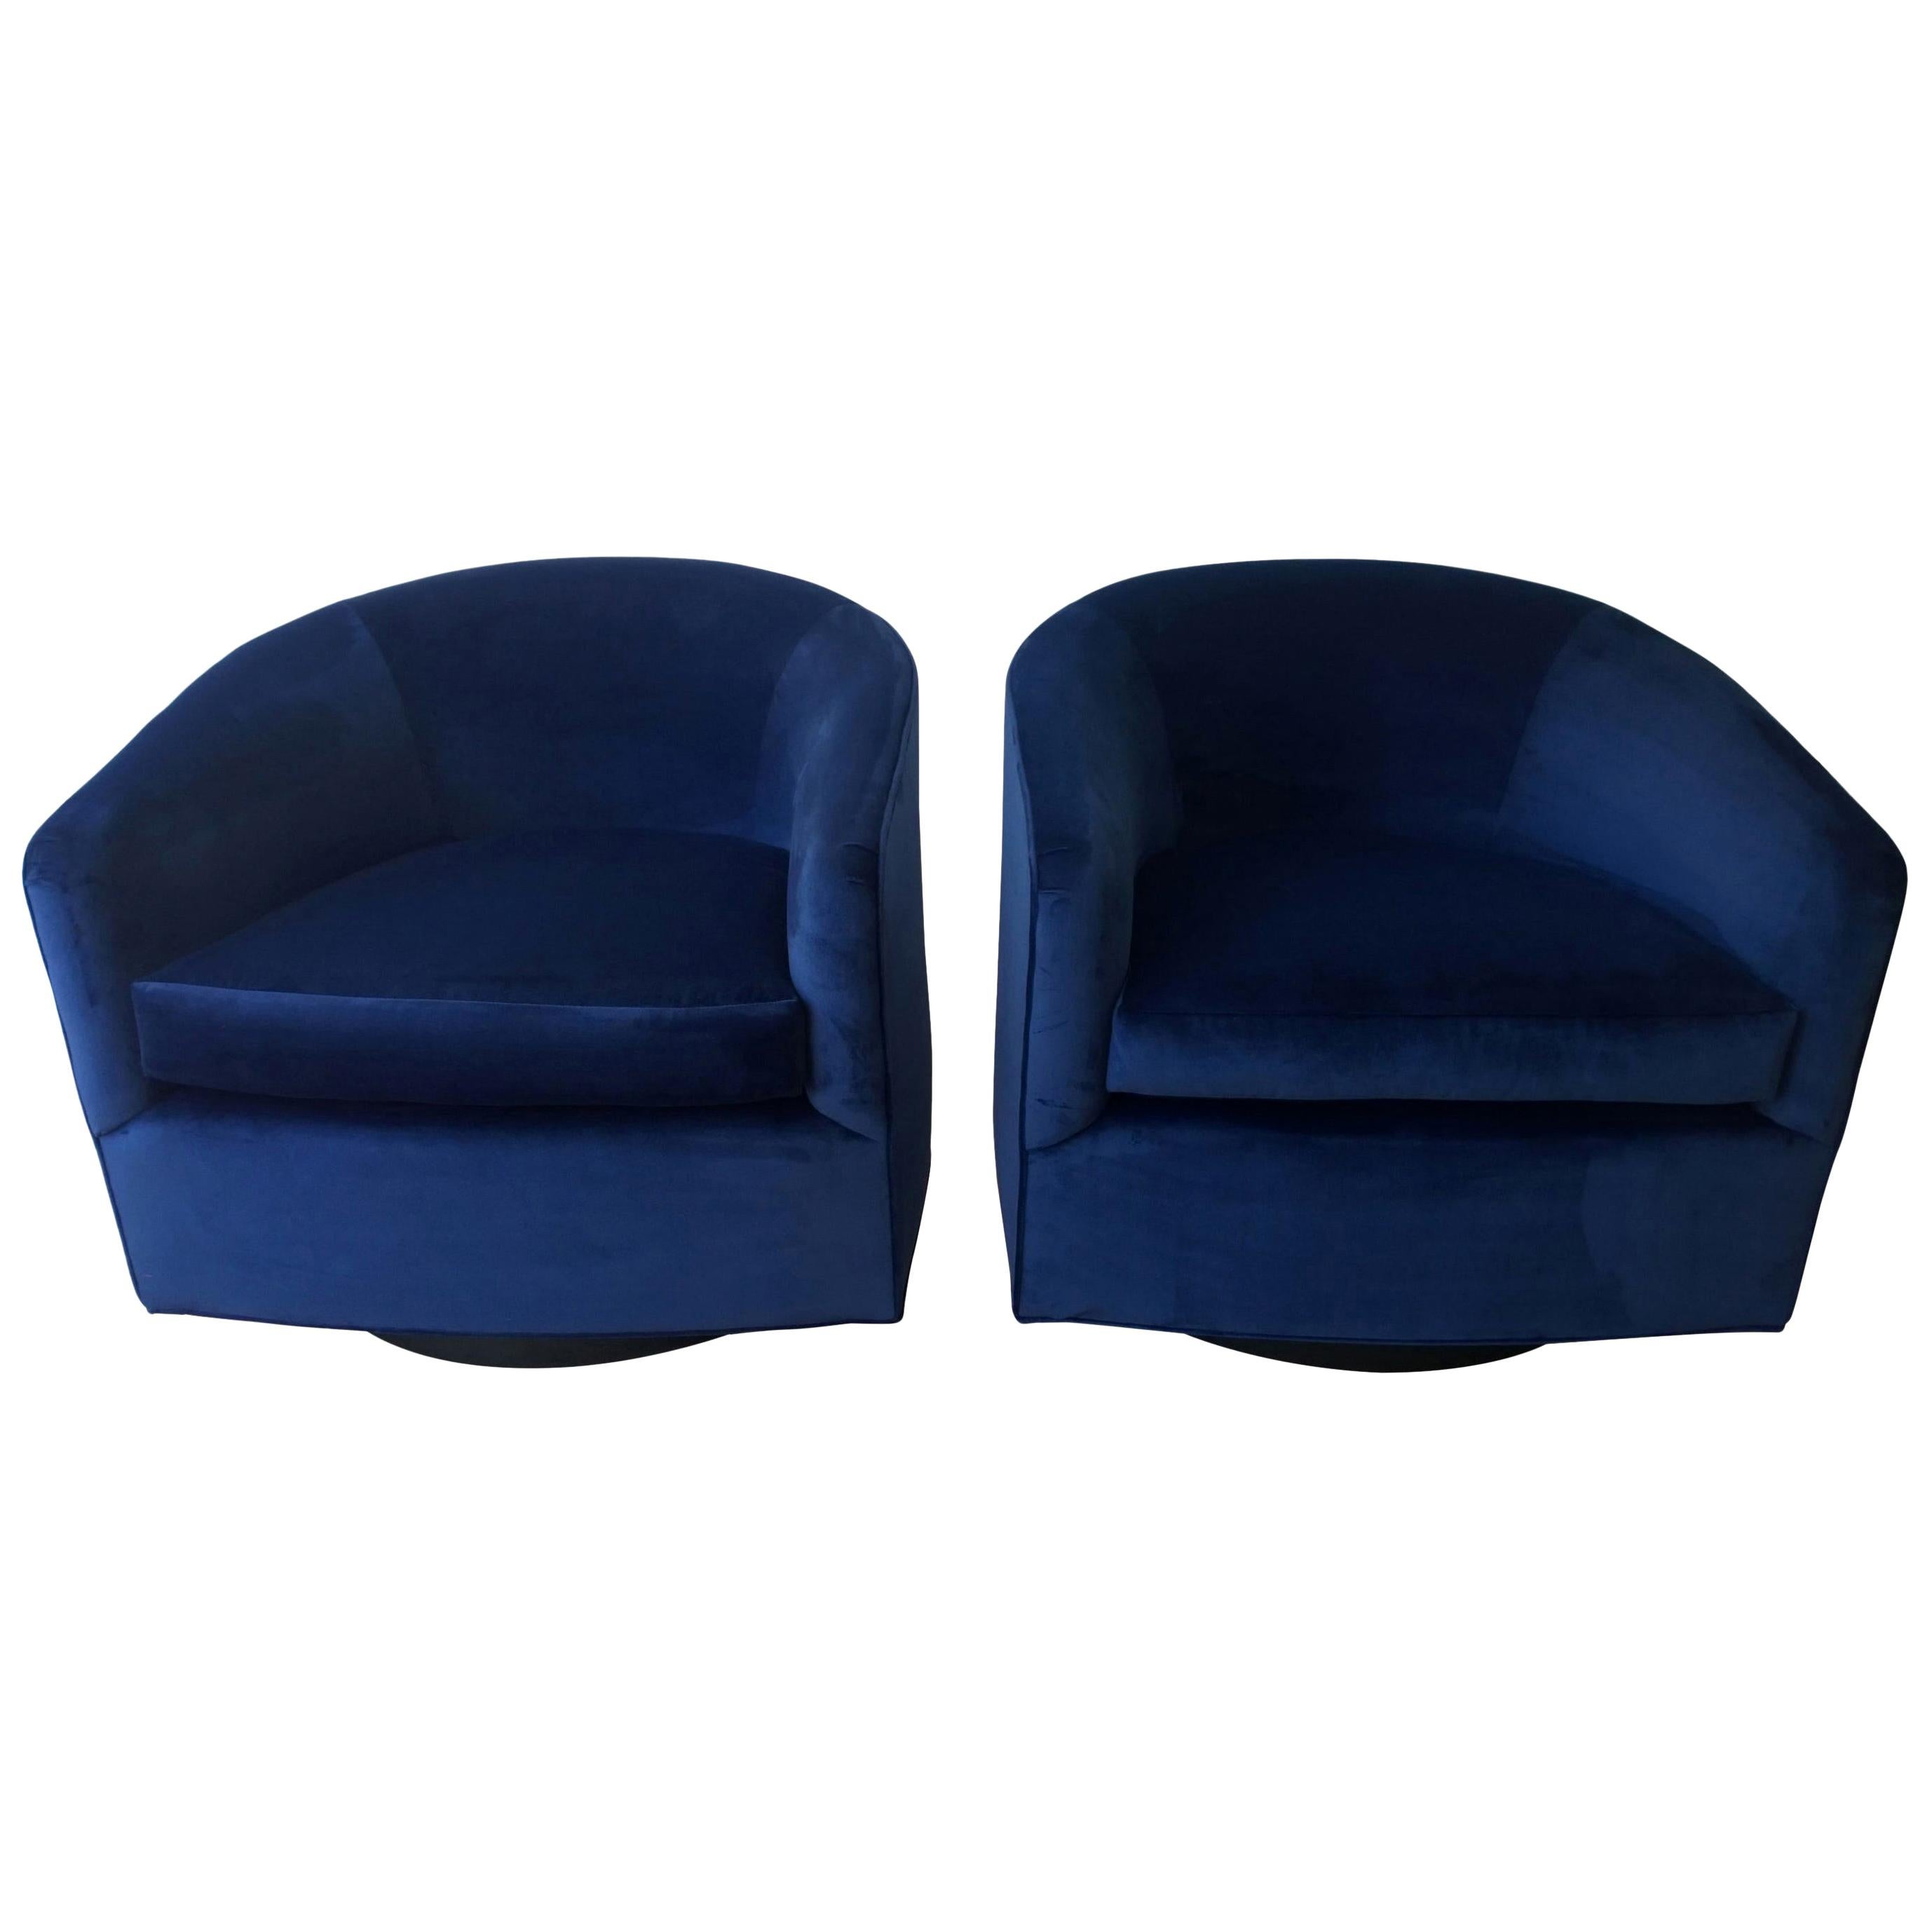 Pair of Baughman Style New Blue Cotton Velvet Swivel Chairs w/ Ebony Wood Bases For Sale